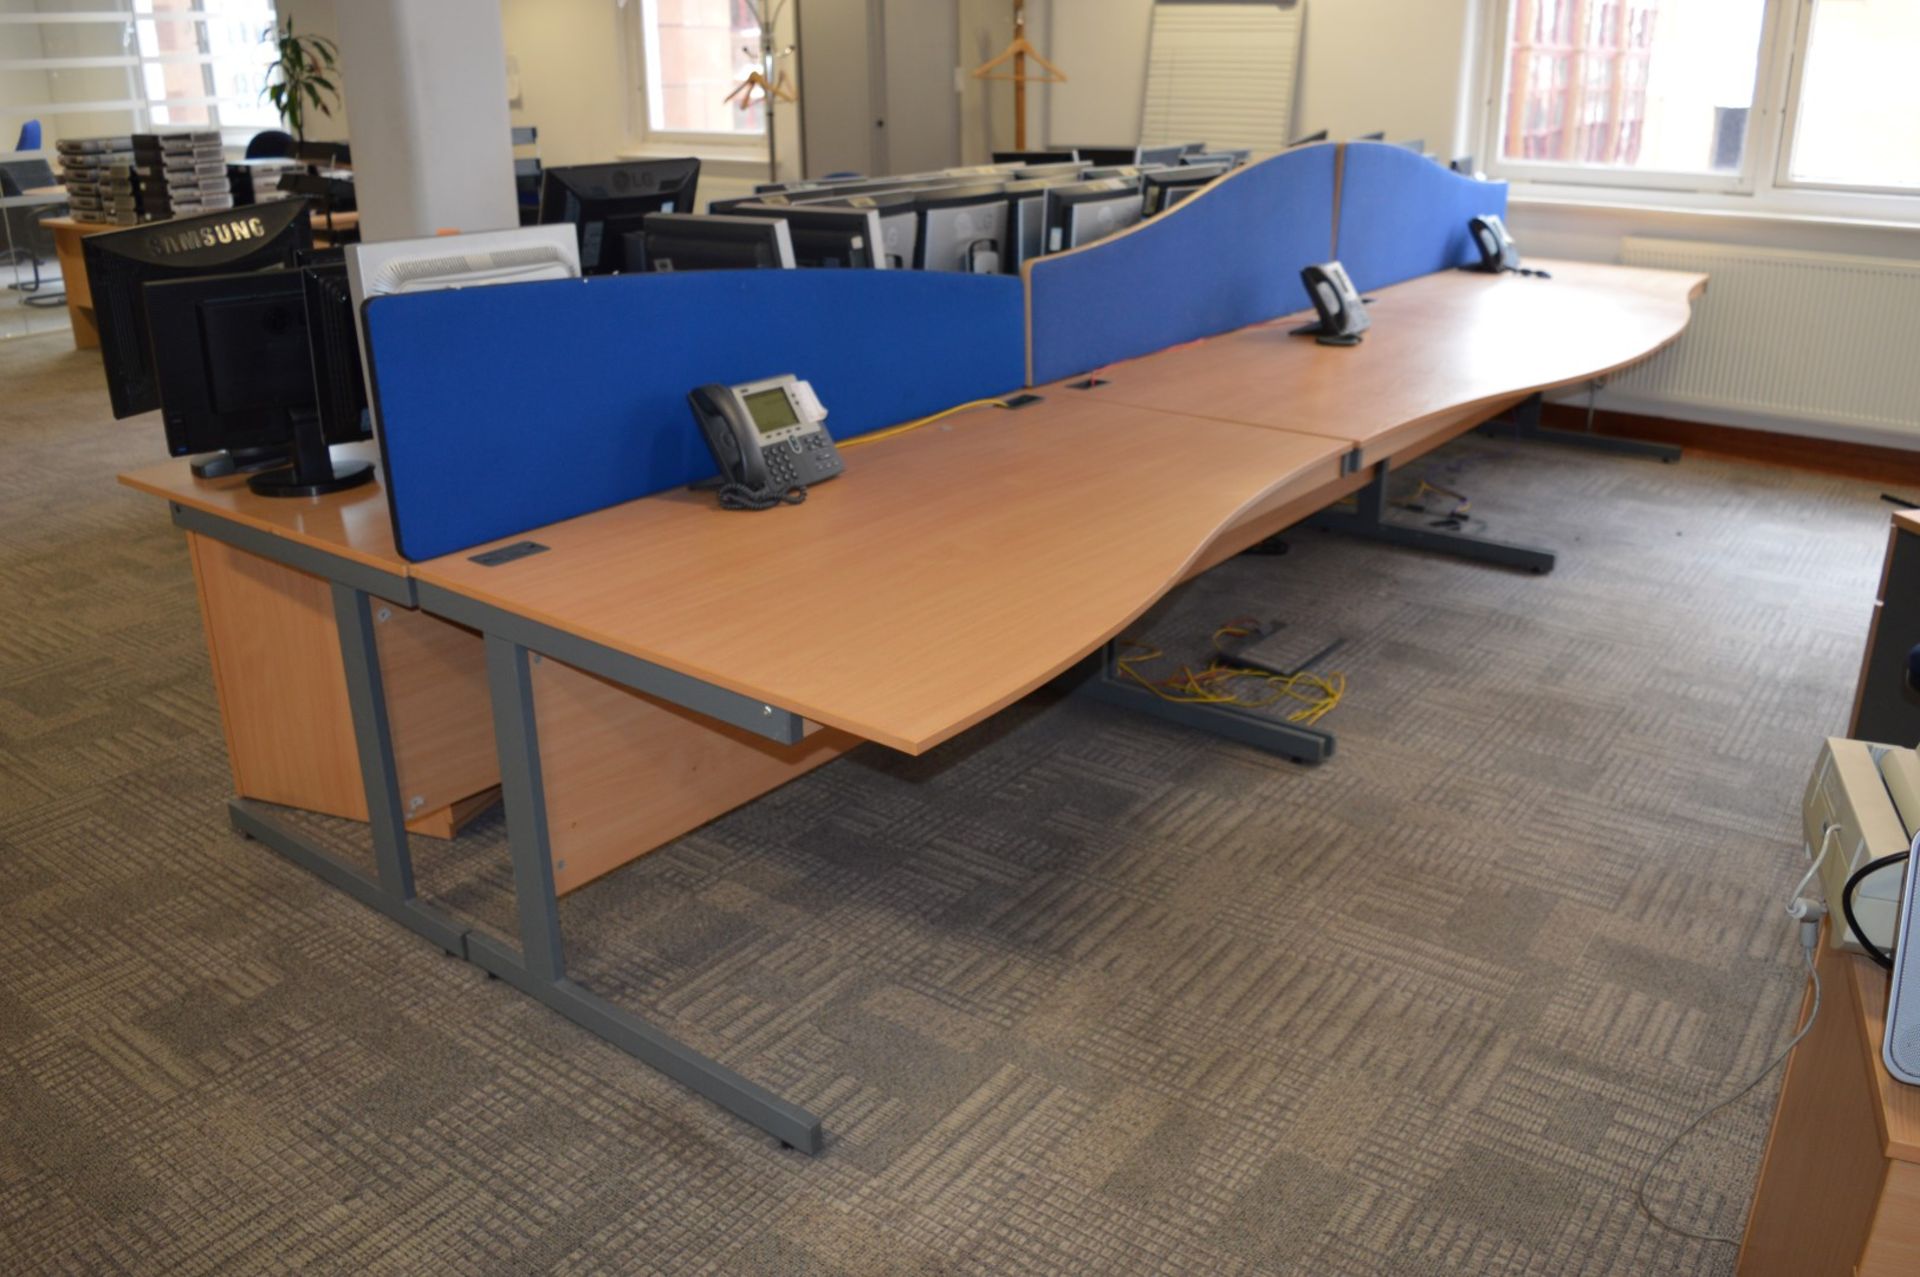 6 x Imperial Office Desks With Partition Dividers - Includes 3 Left Hand & 3 Right Hand Desks -